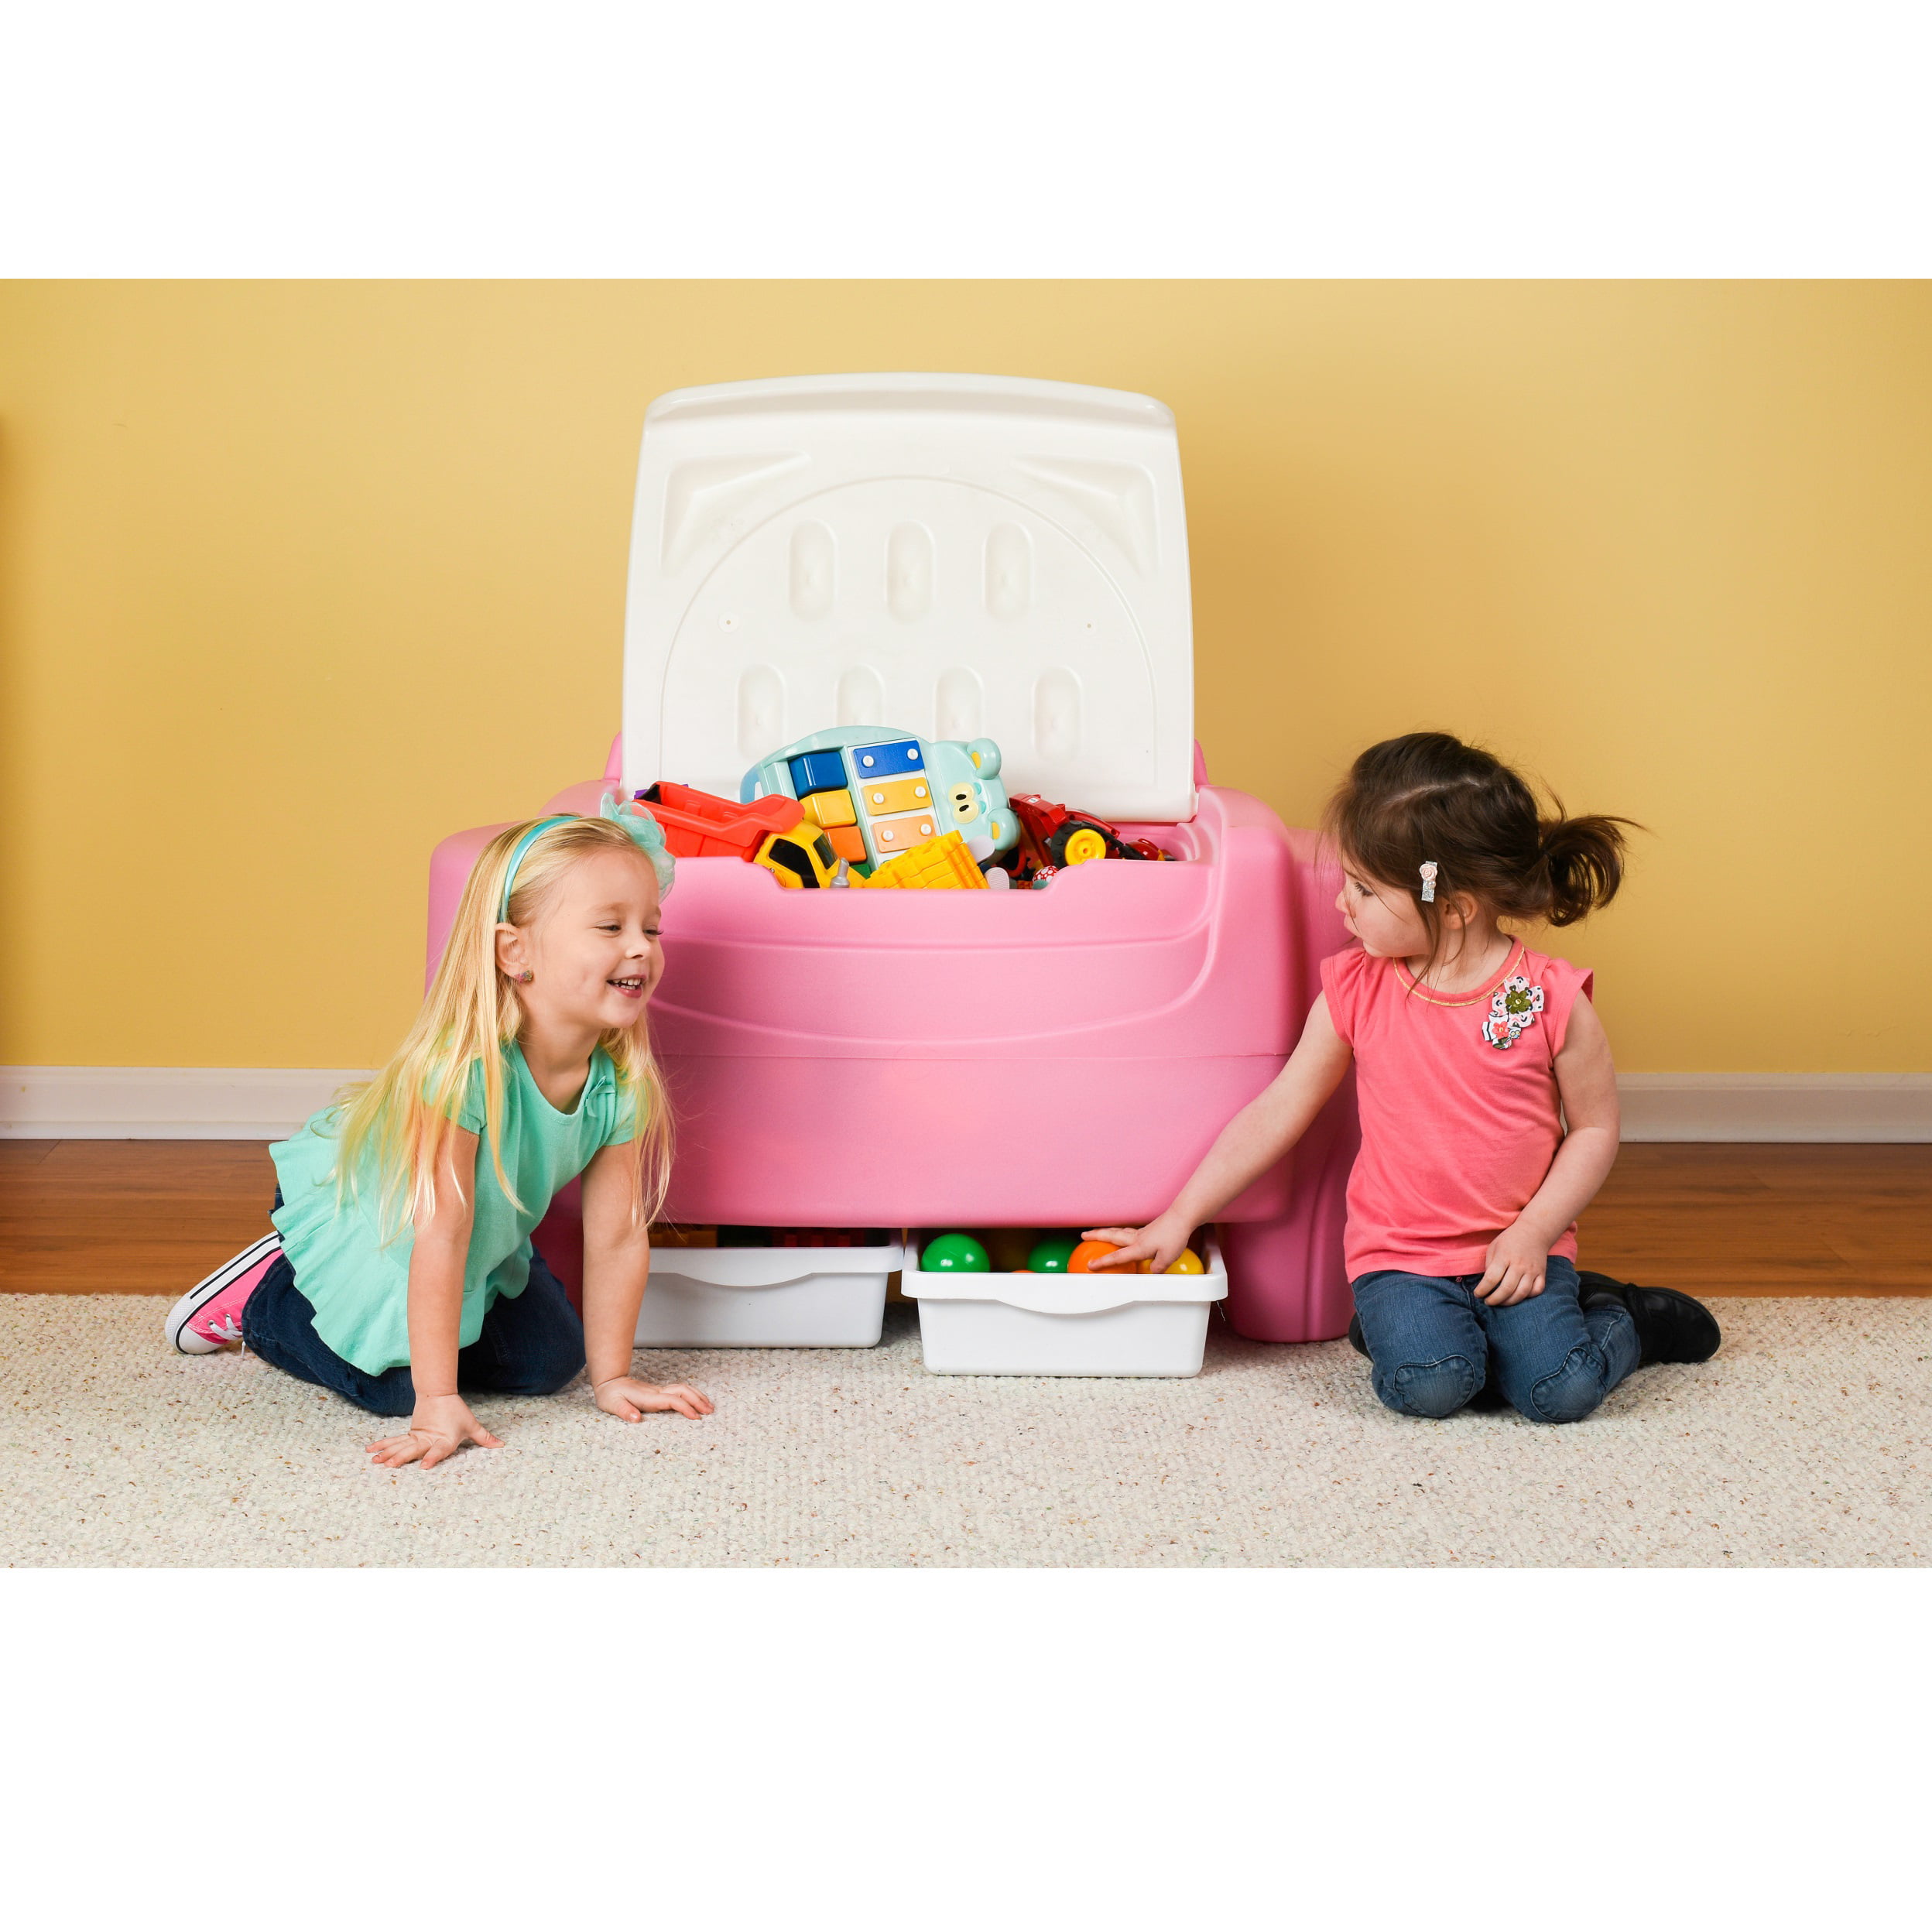 little tikes sort and store toy chest pink